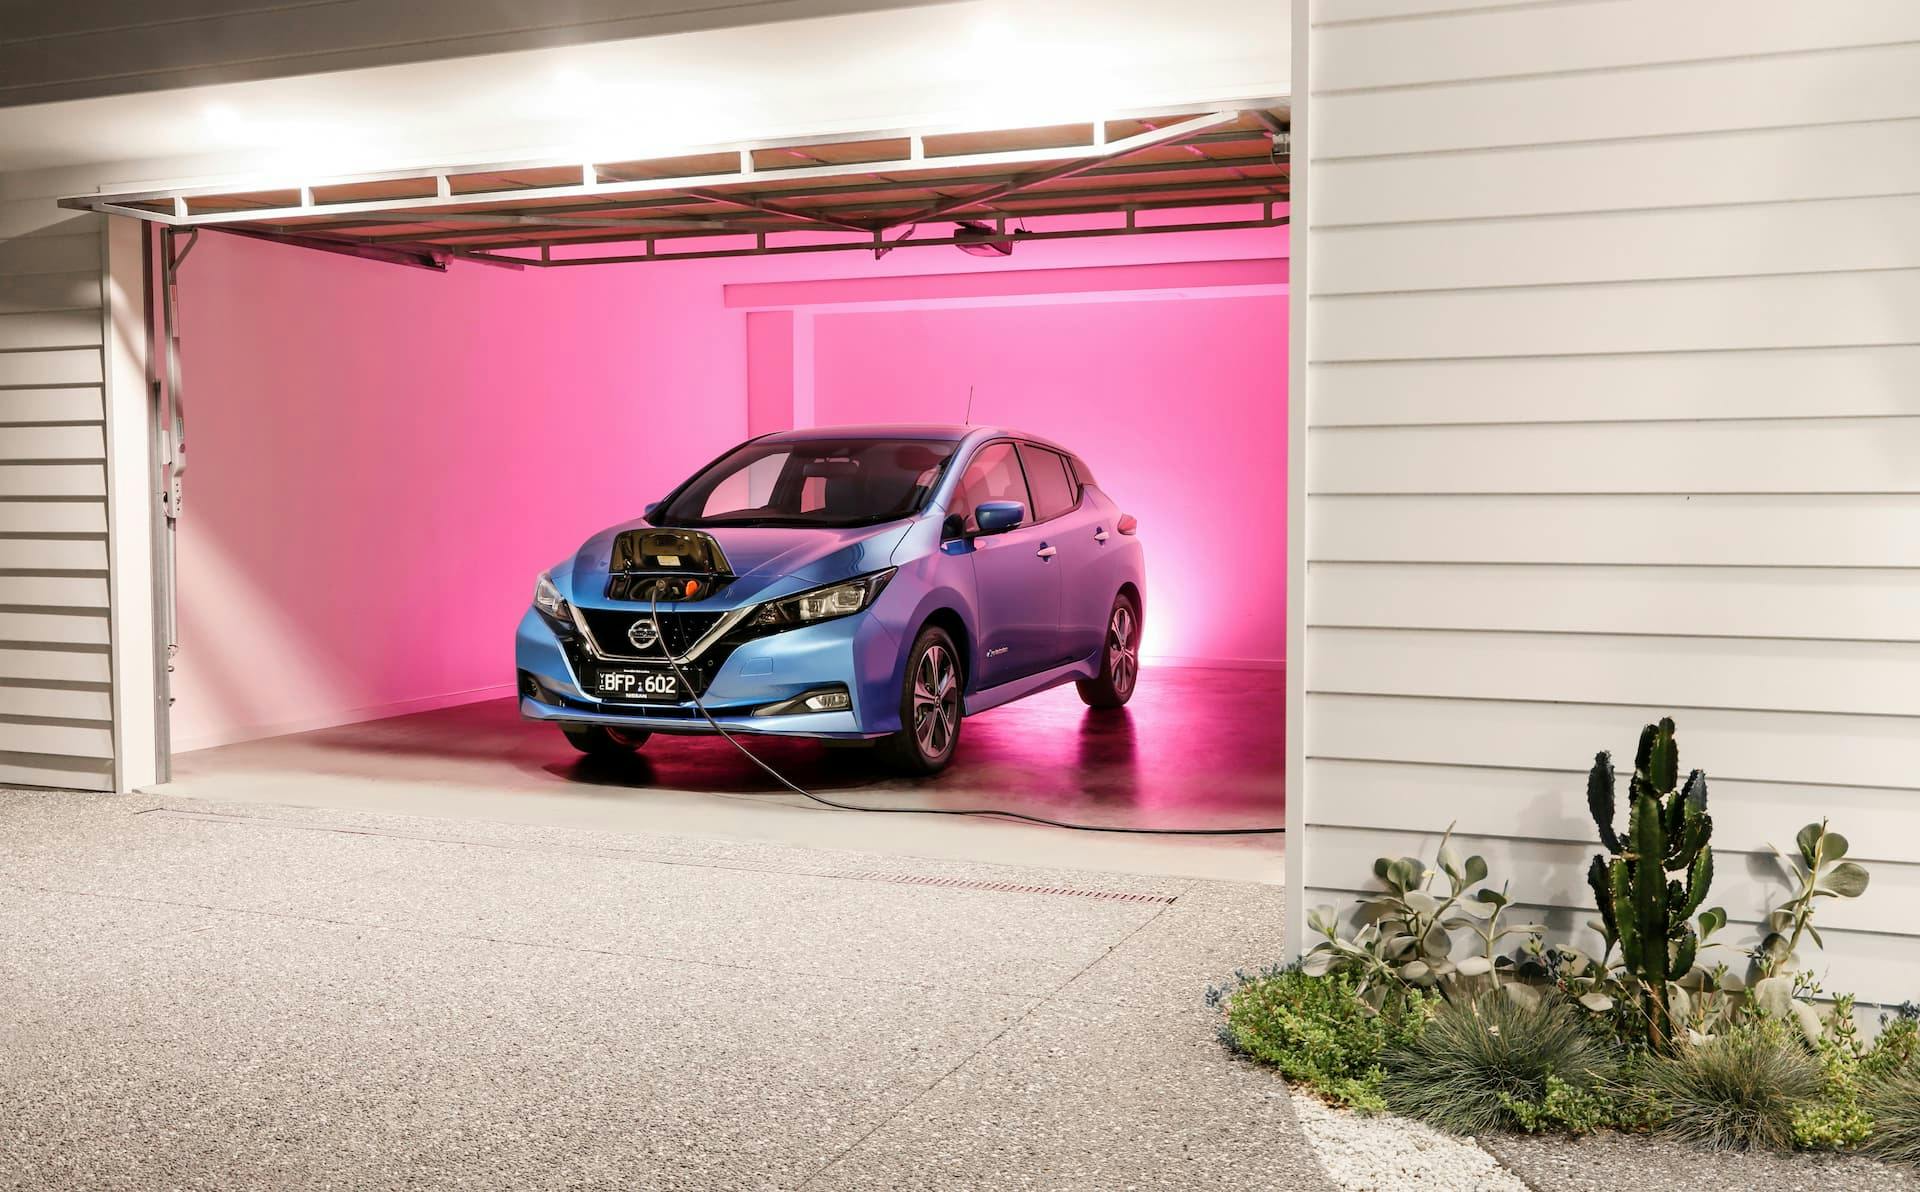 Nissan Leaf e+ plugged in garage using vehicle-to-home technology